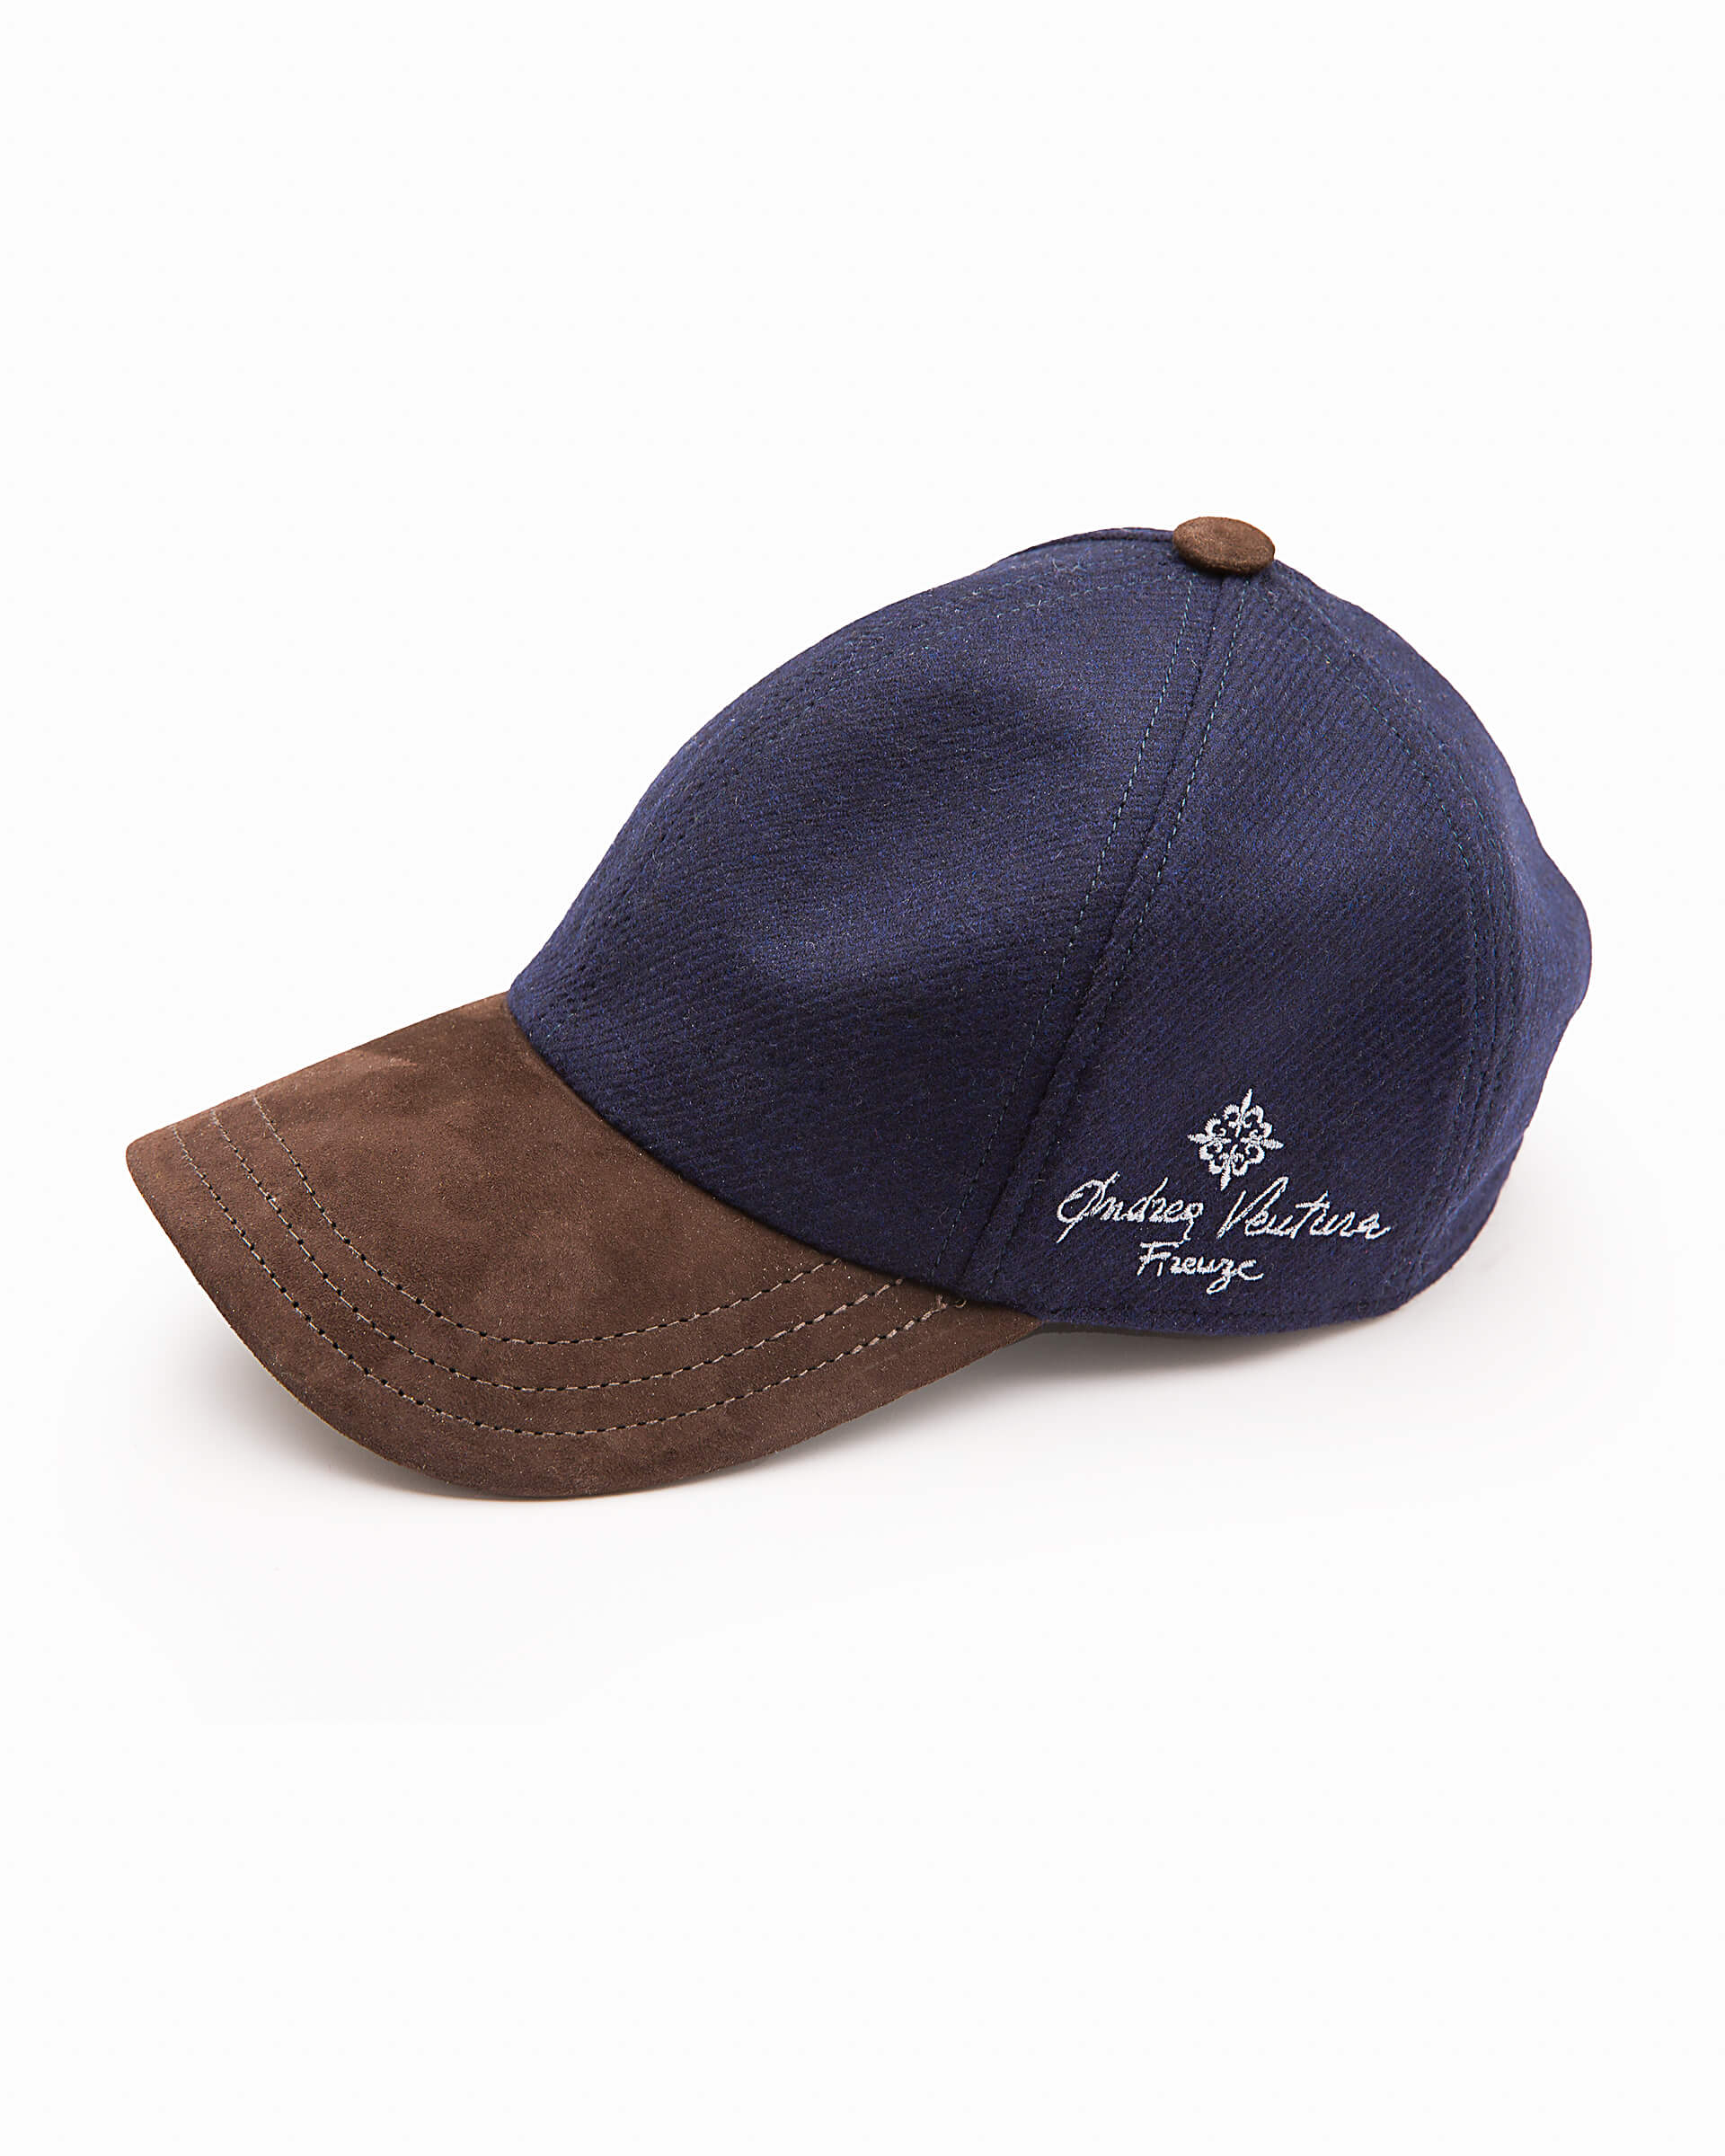 eclipse with hat cashmere Ventura Firenze made Baseball cap visor - blue Andrea of water-repellent